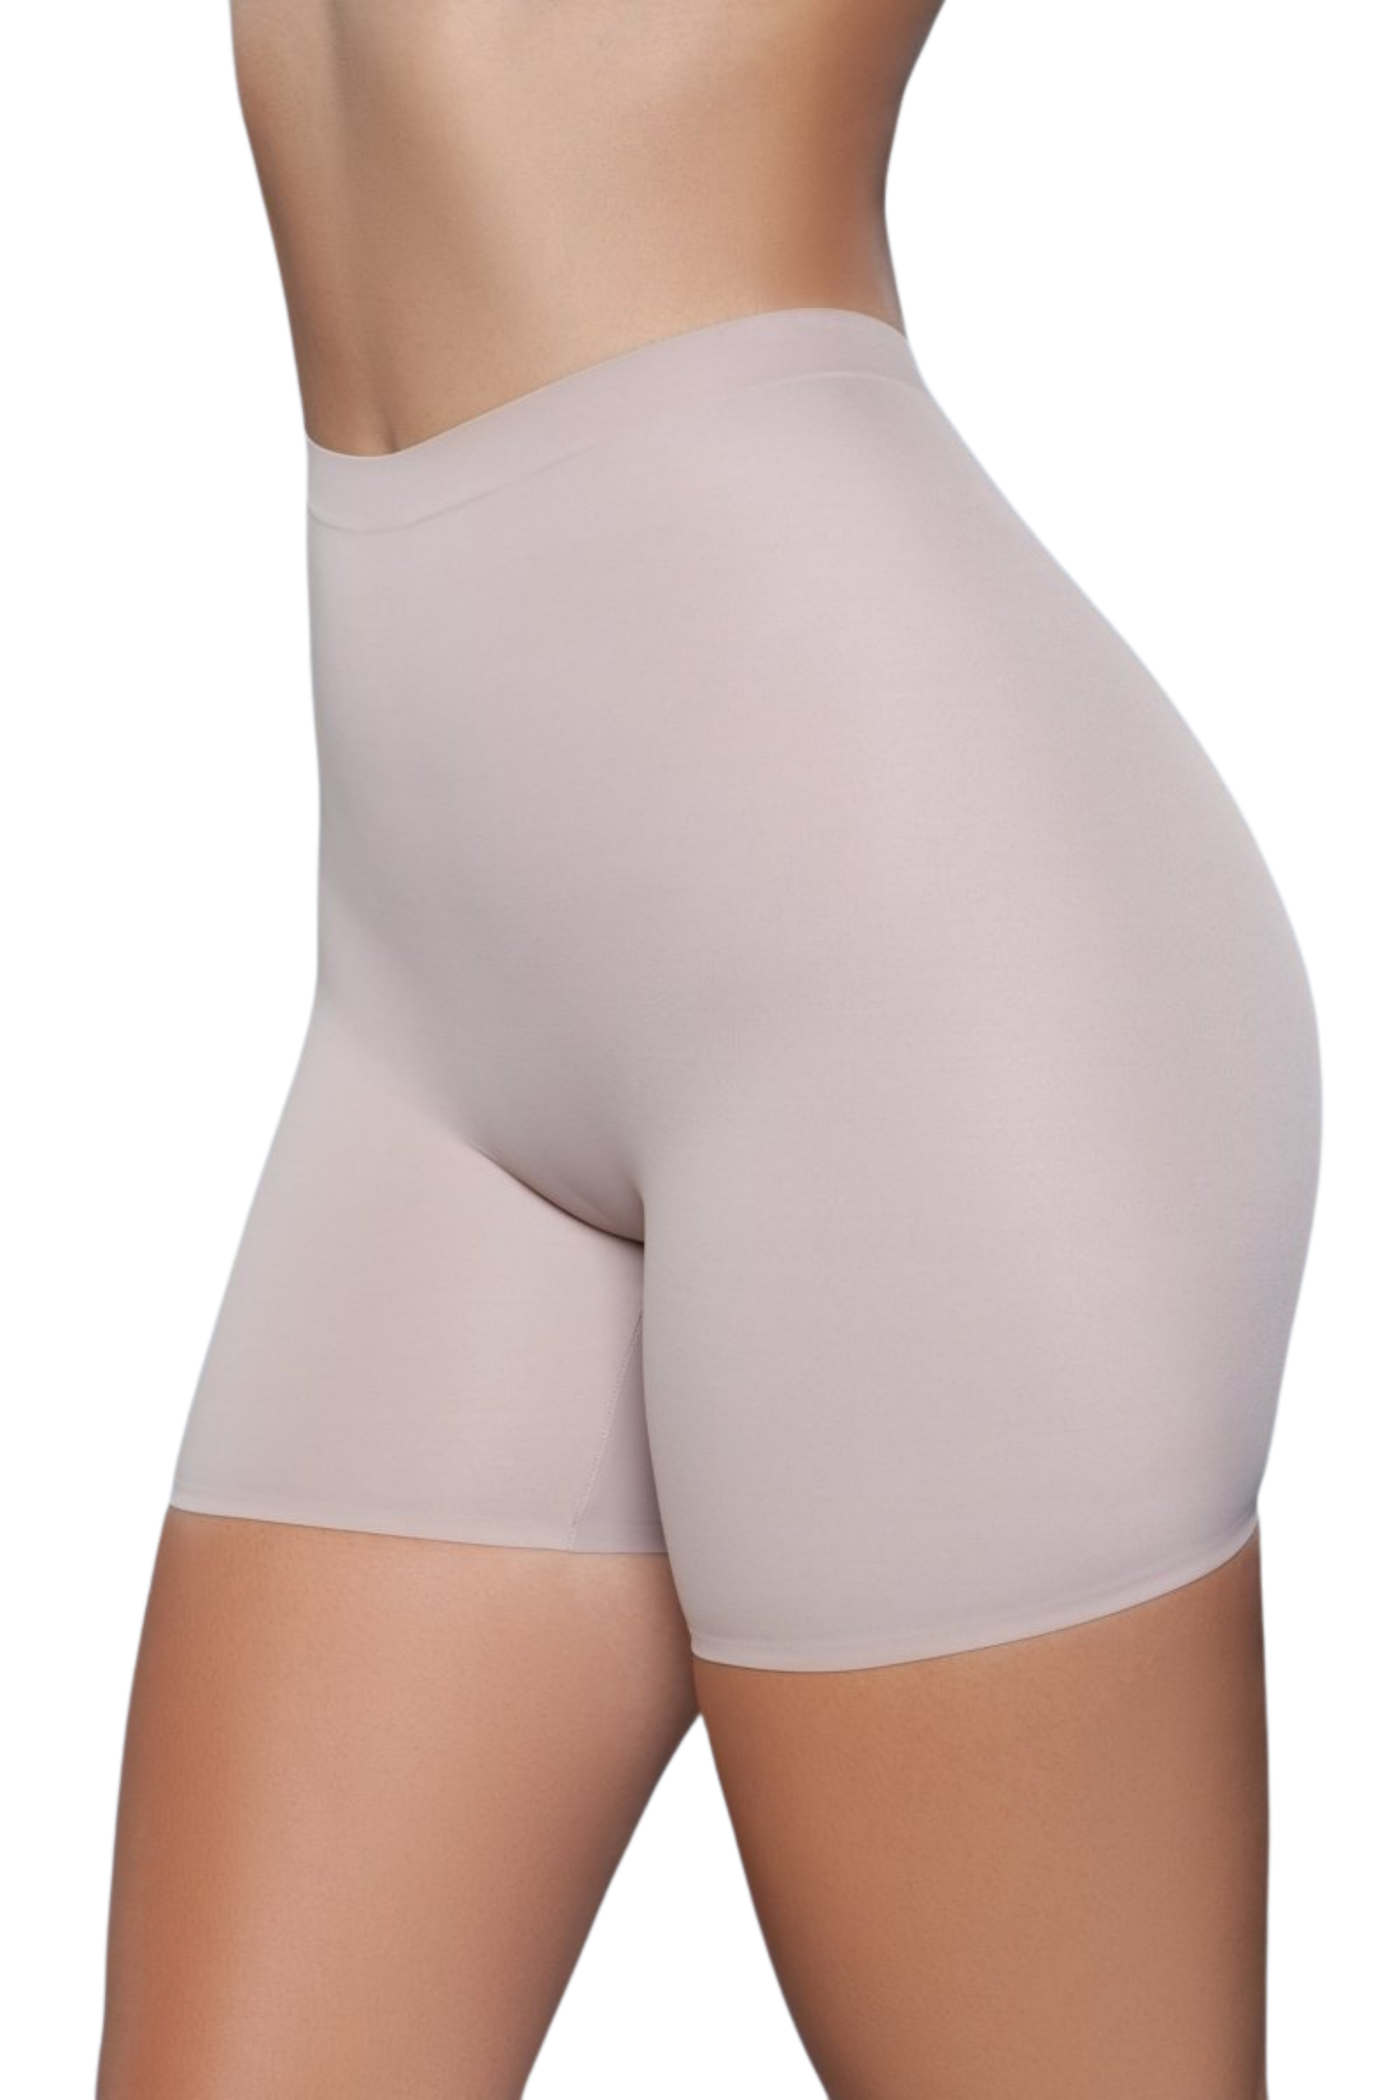 Shapewear Shorts - For Love of Lingerie